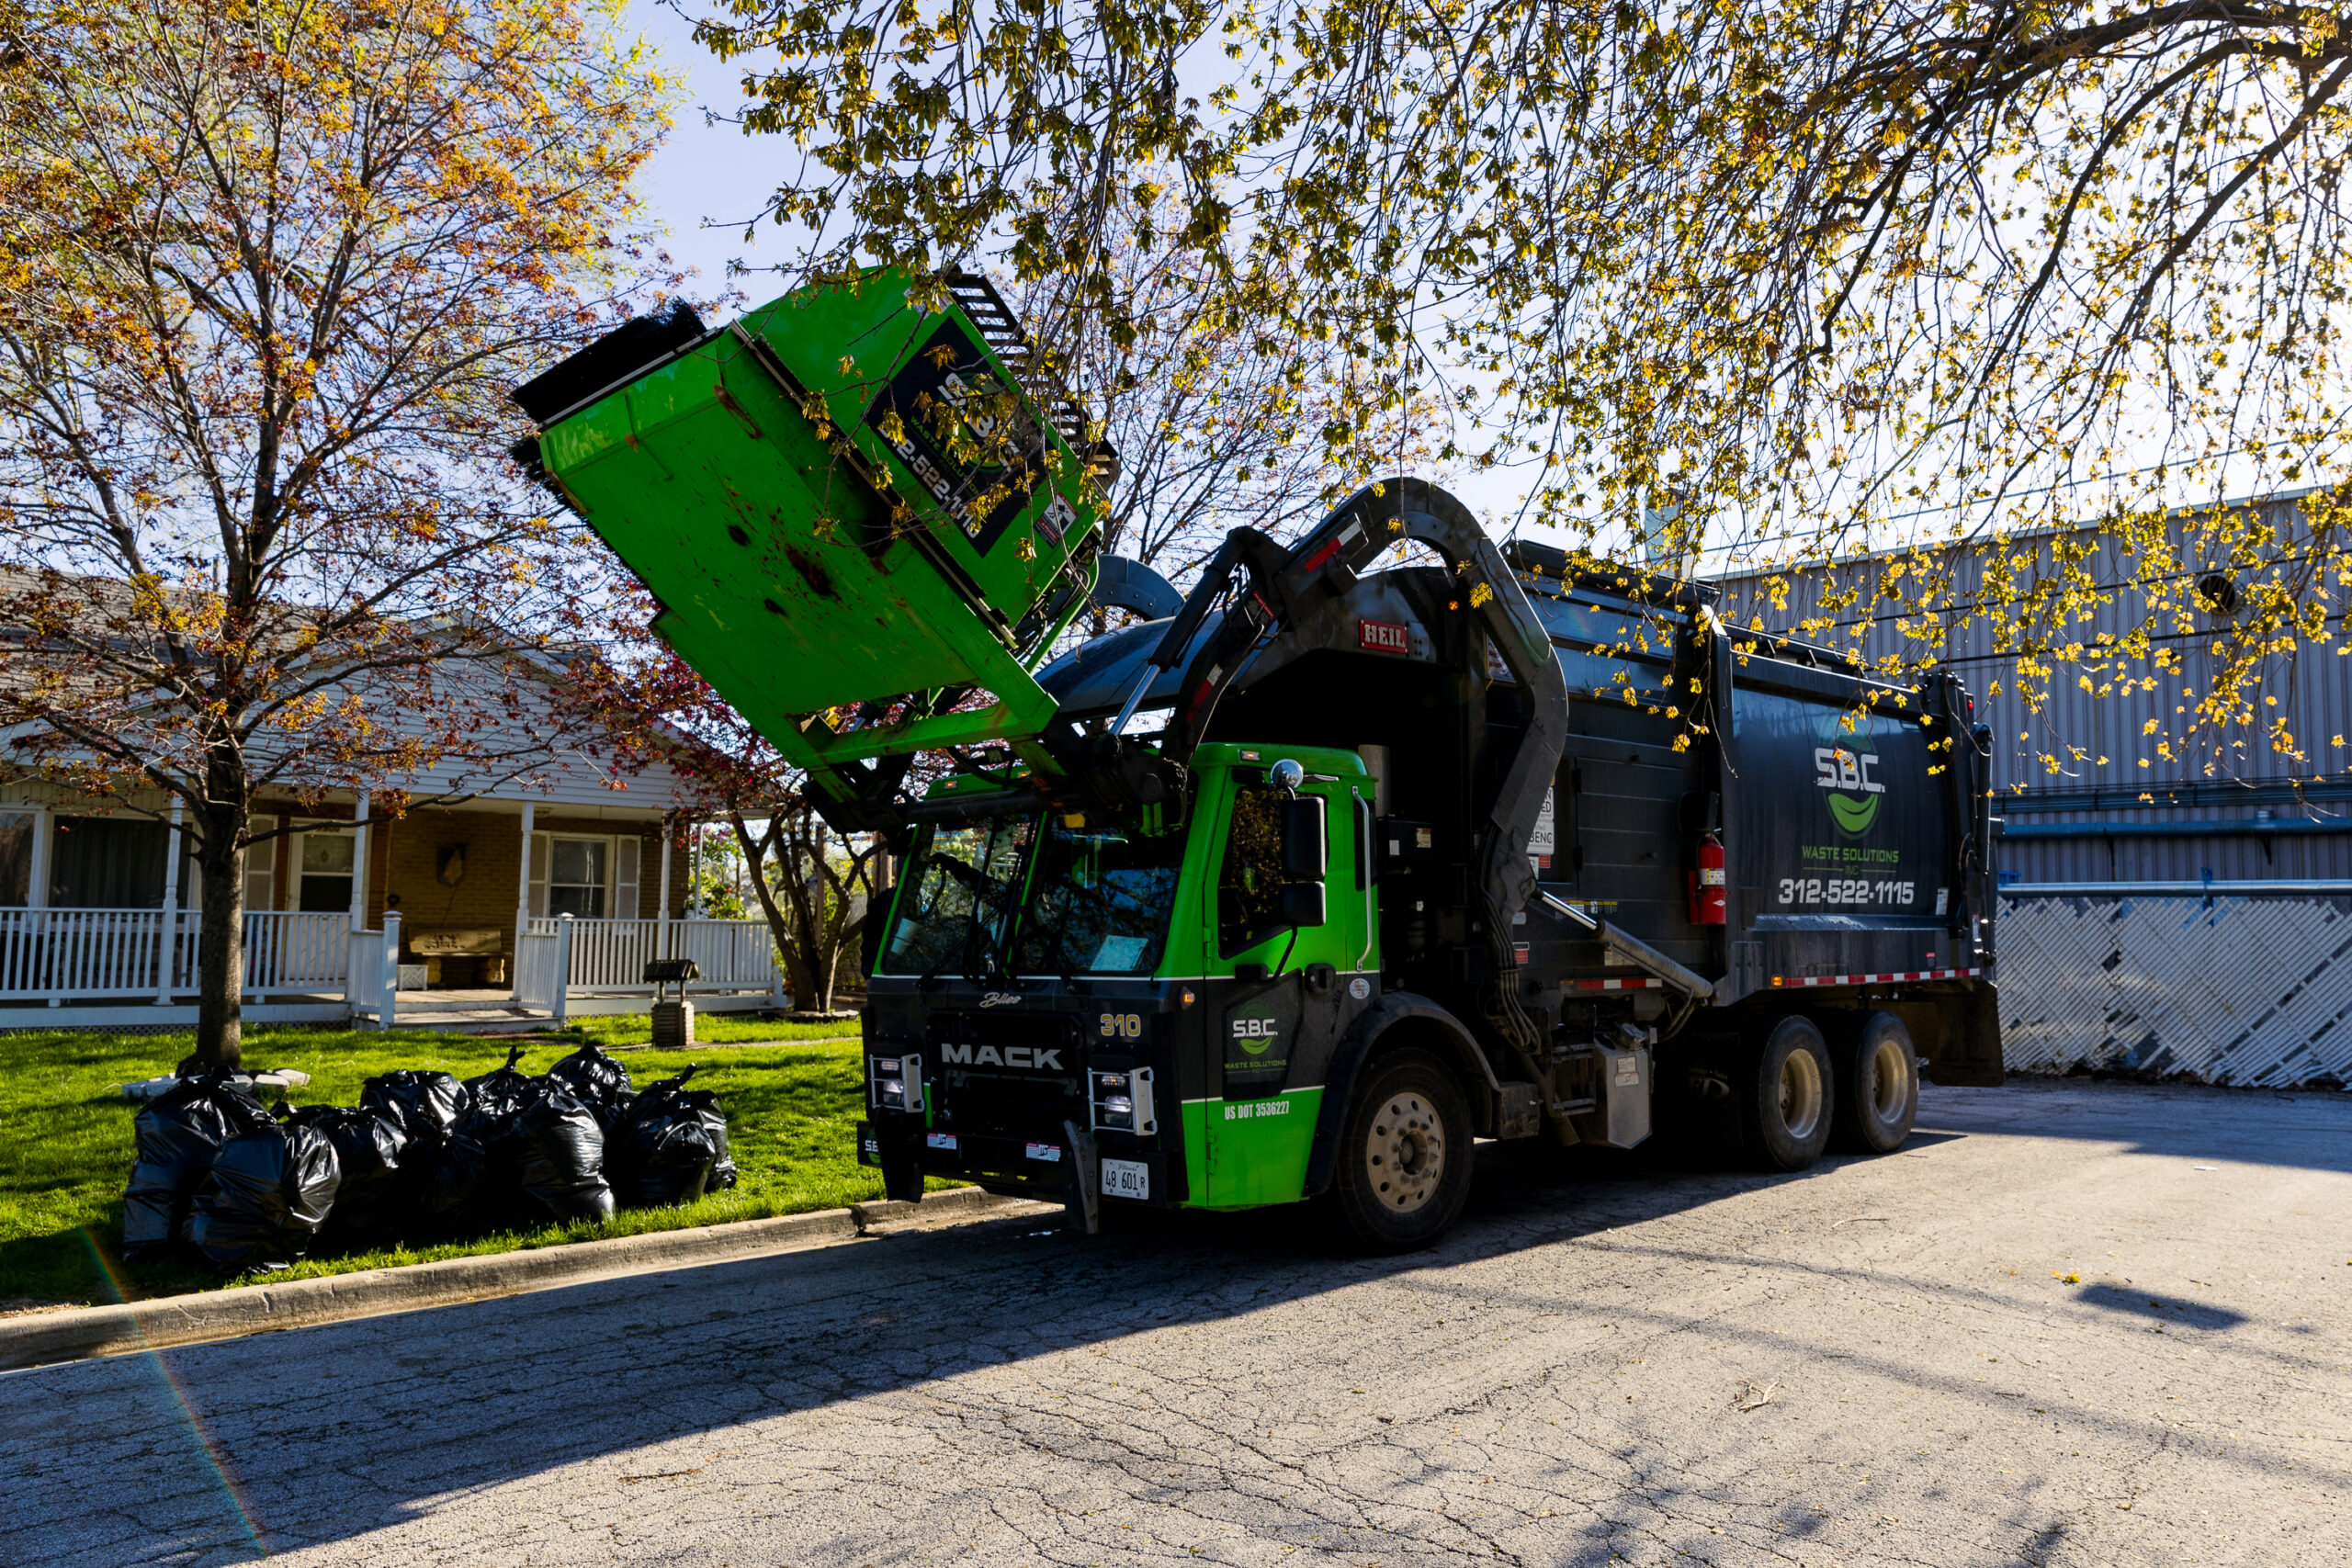 An S.B.C. garbage truck picking up trash at a Bridgeview home.